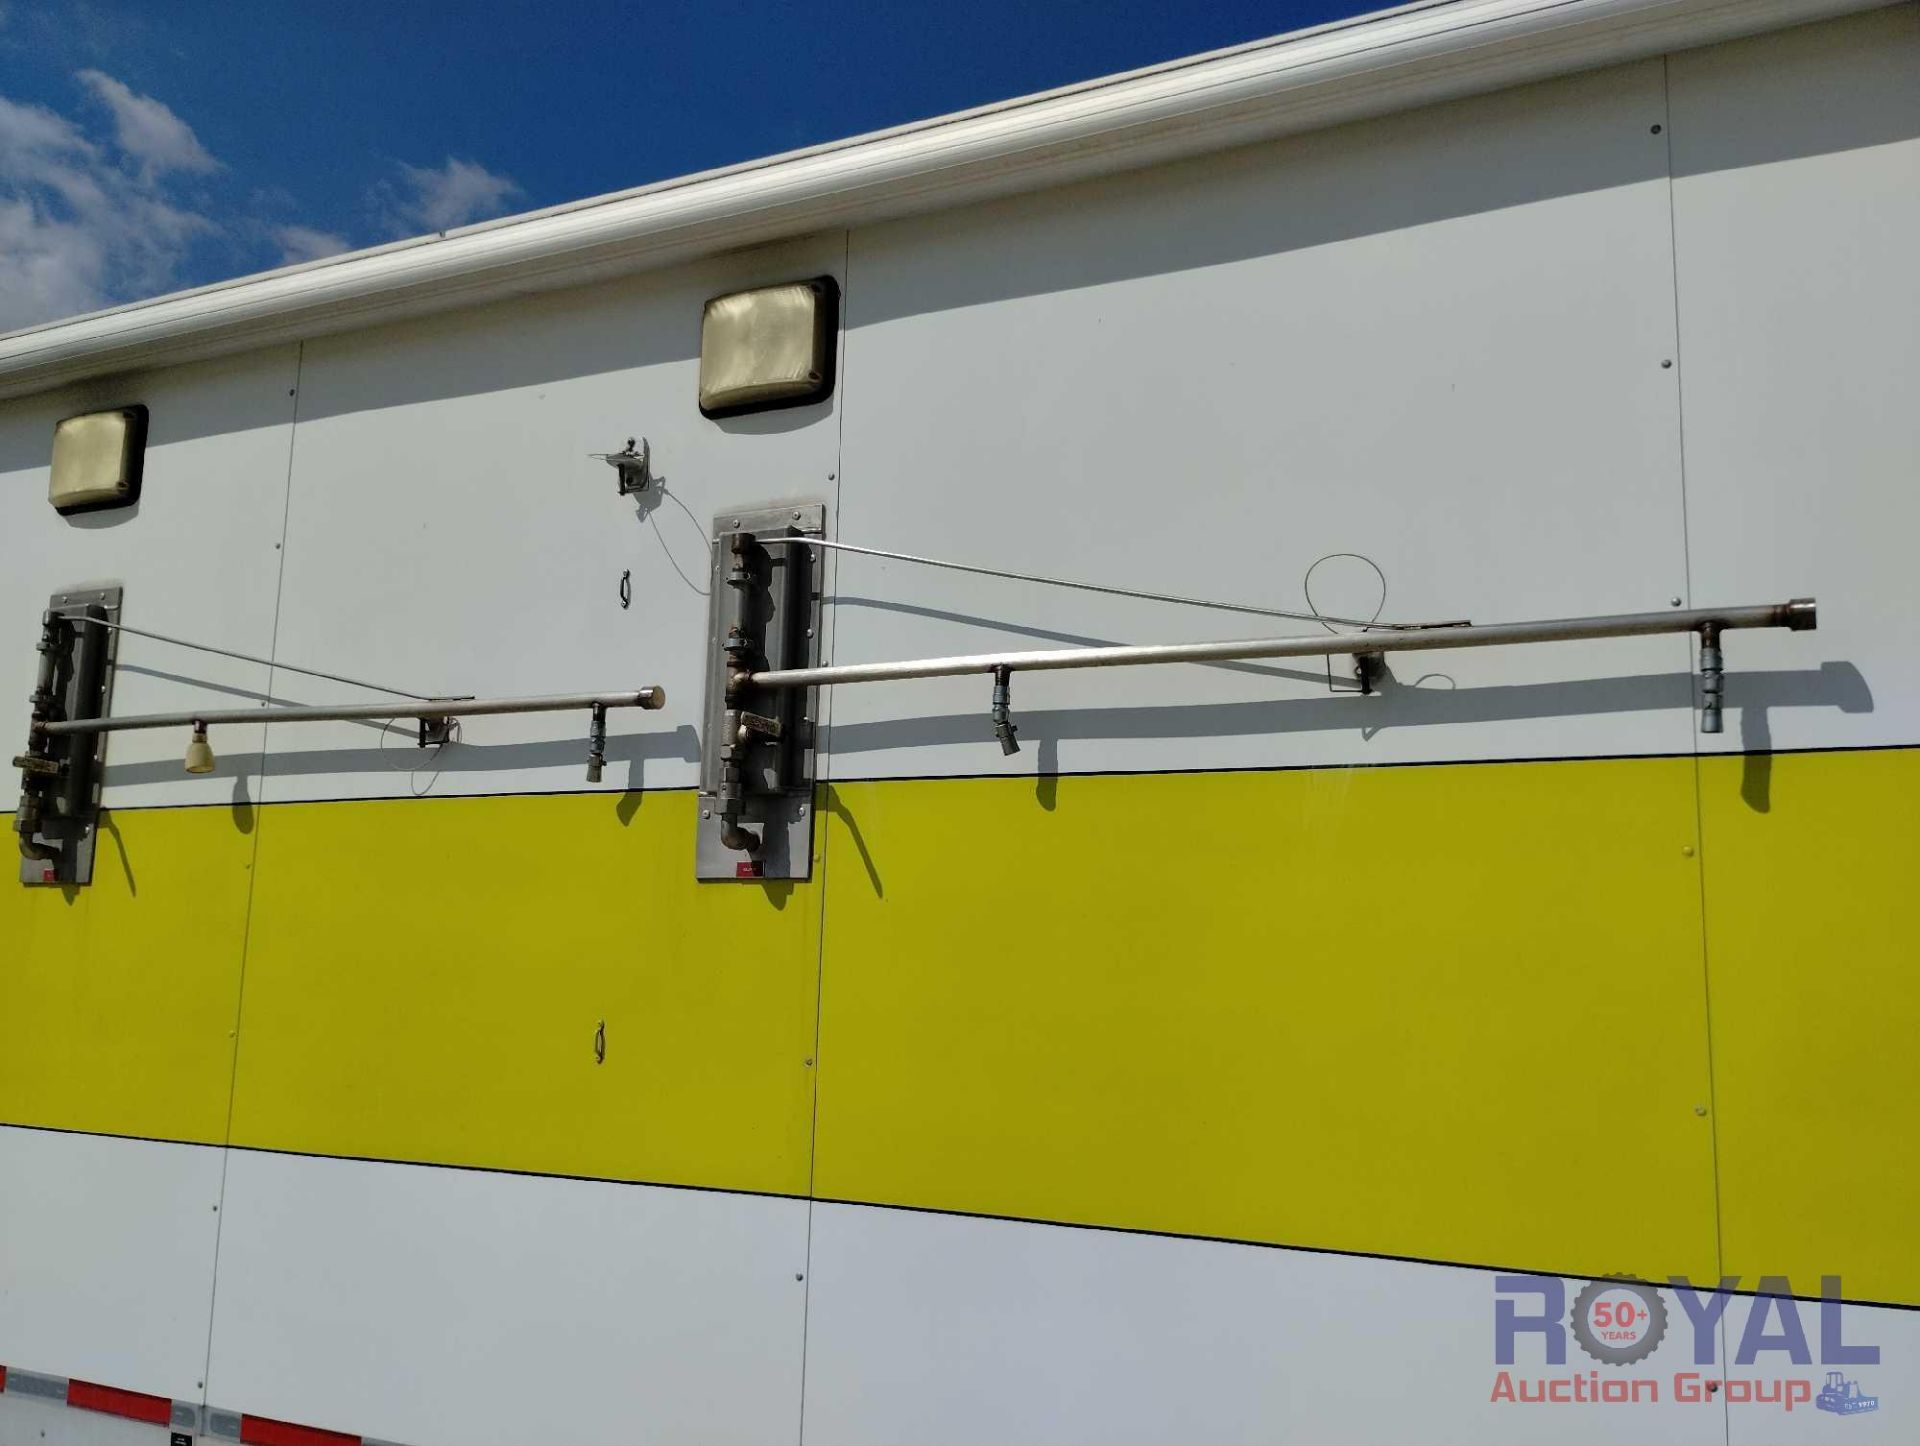 Fire/Rescue Portable Bathroom and Shower Trailer - Image 13 of 50